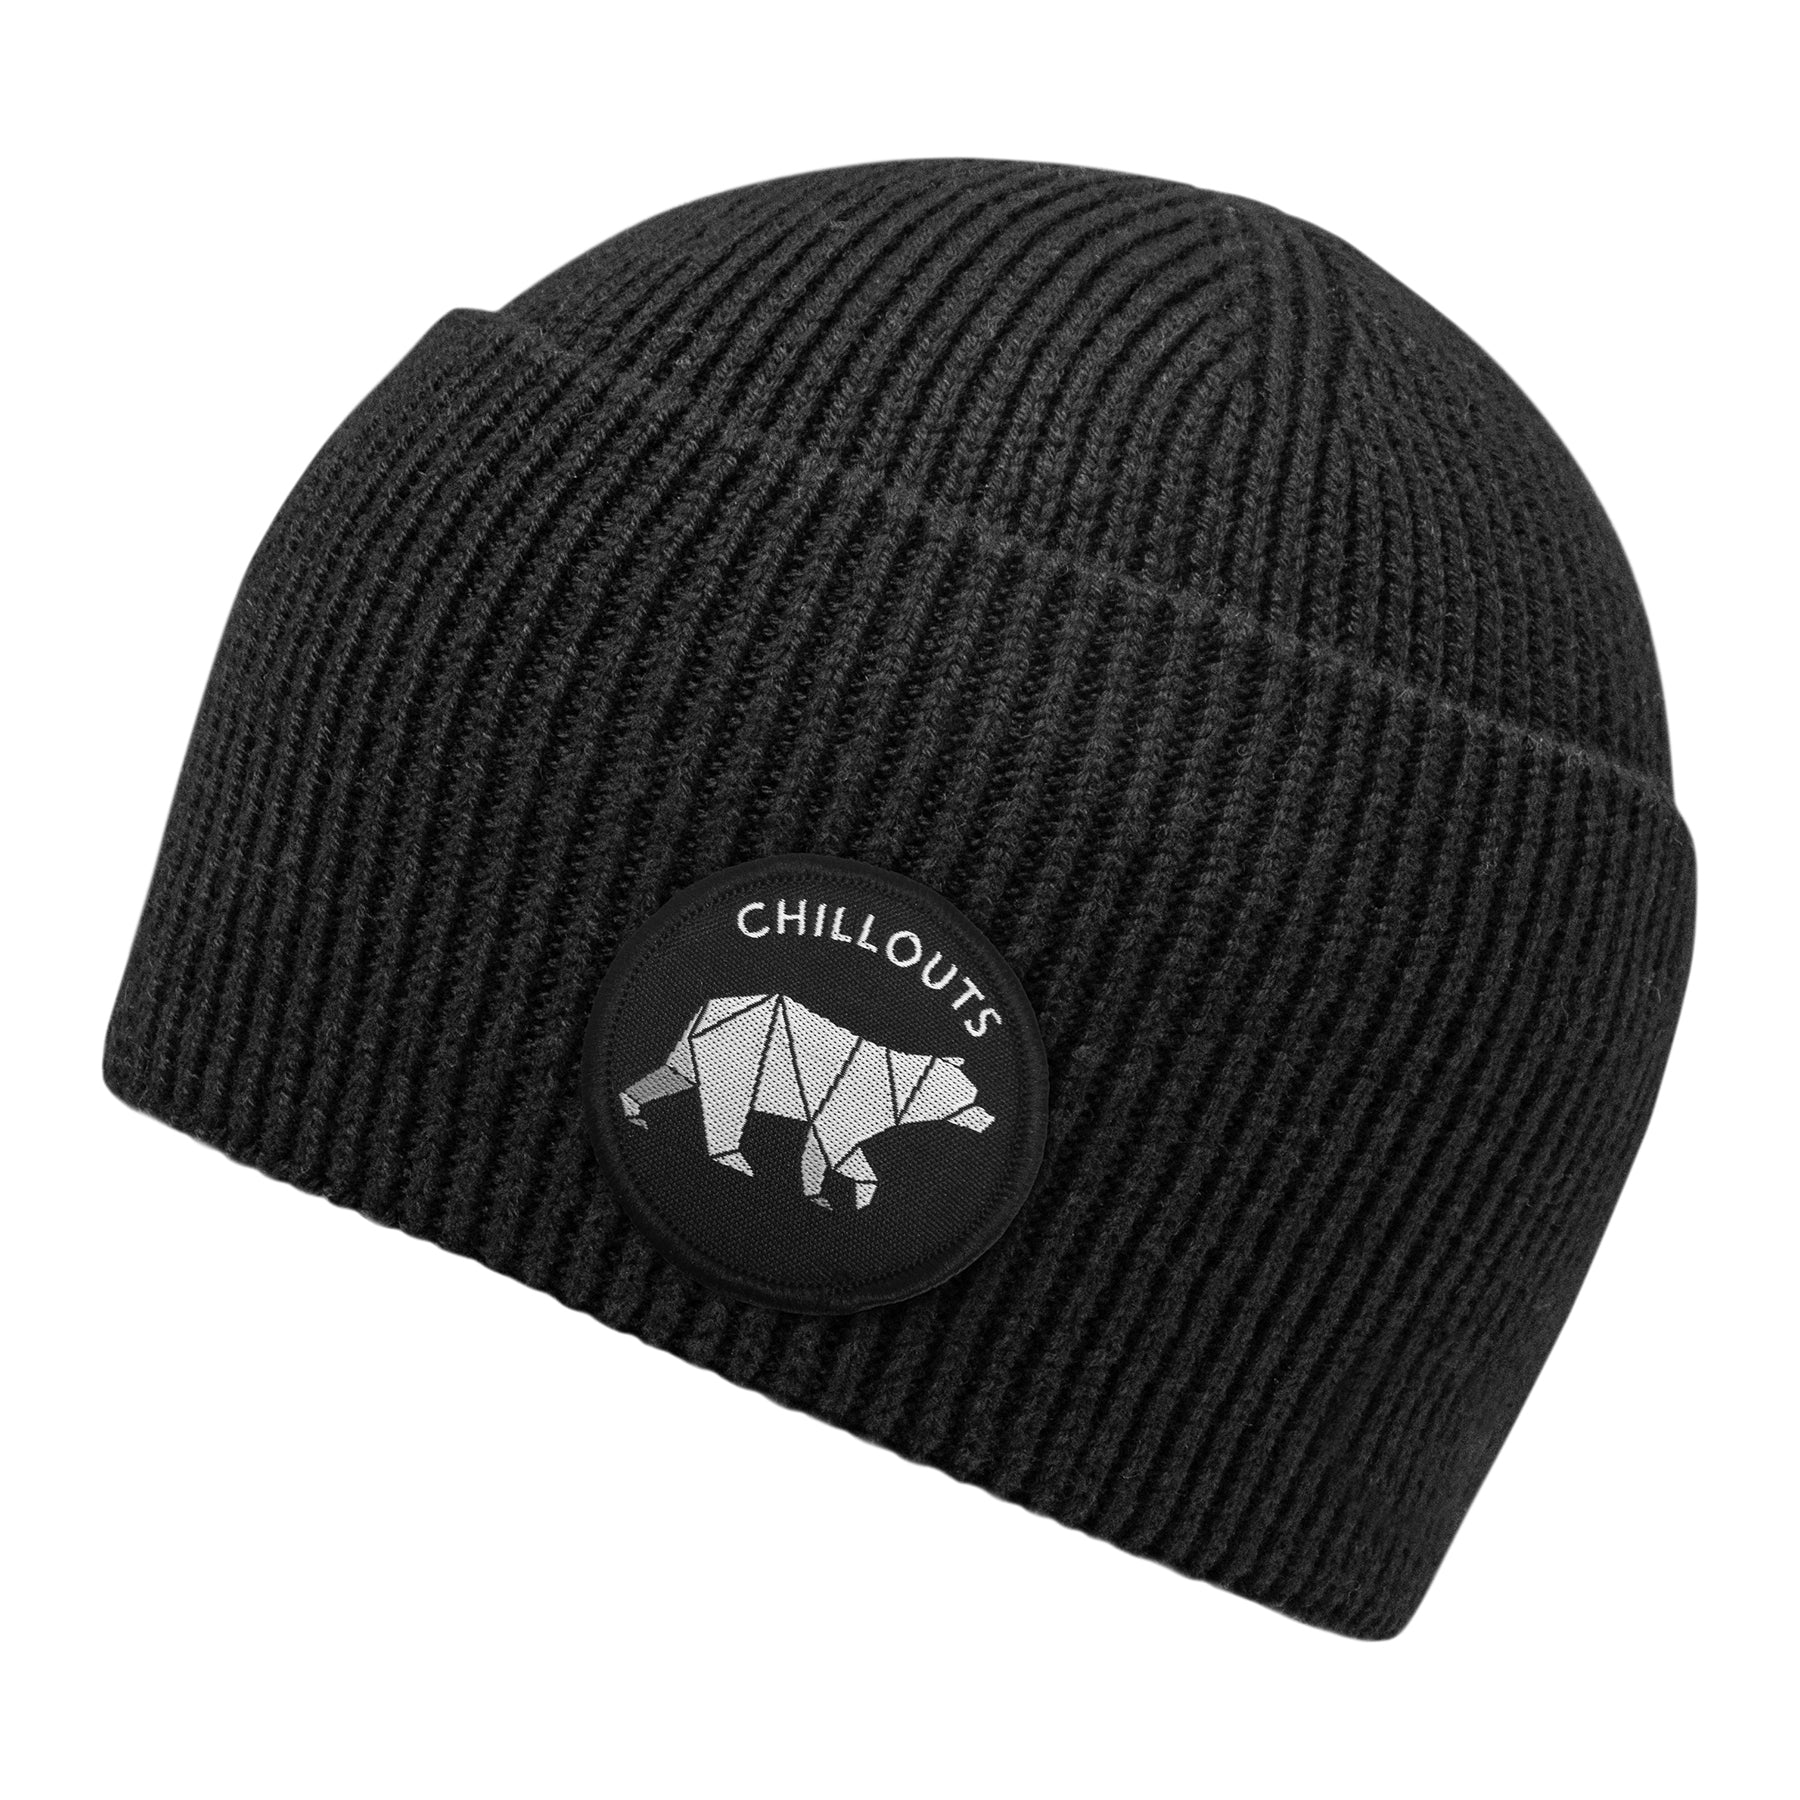 a cool - cuff embroidery Chillouts cause hat with – Beanie good for & Headwear